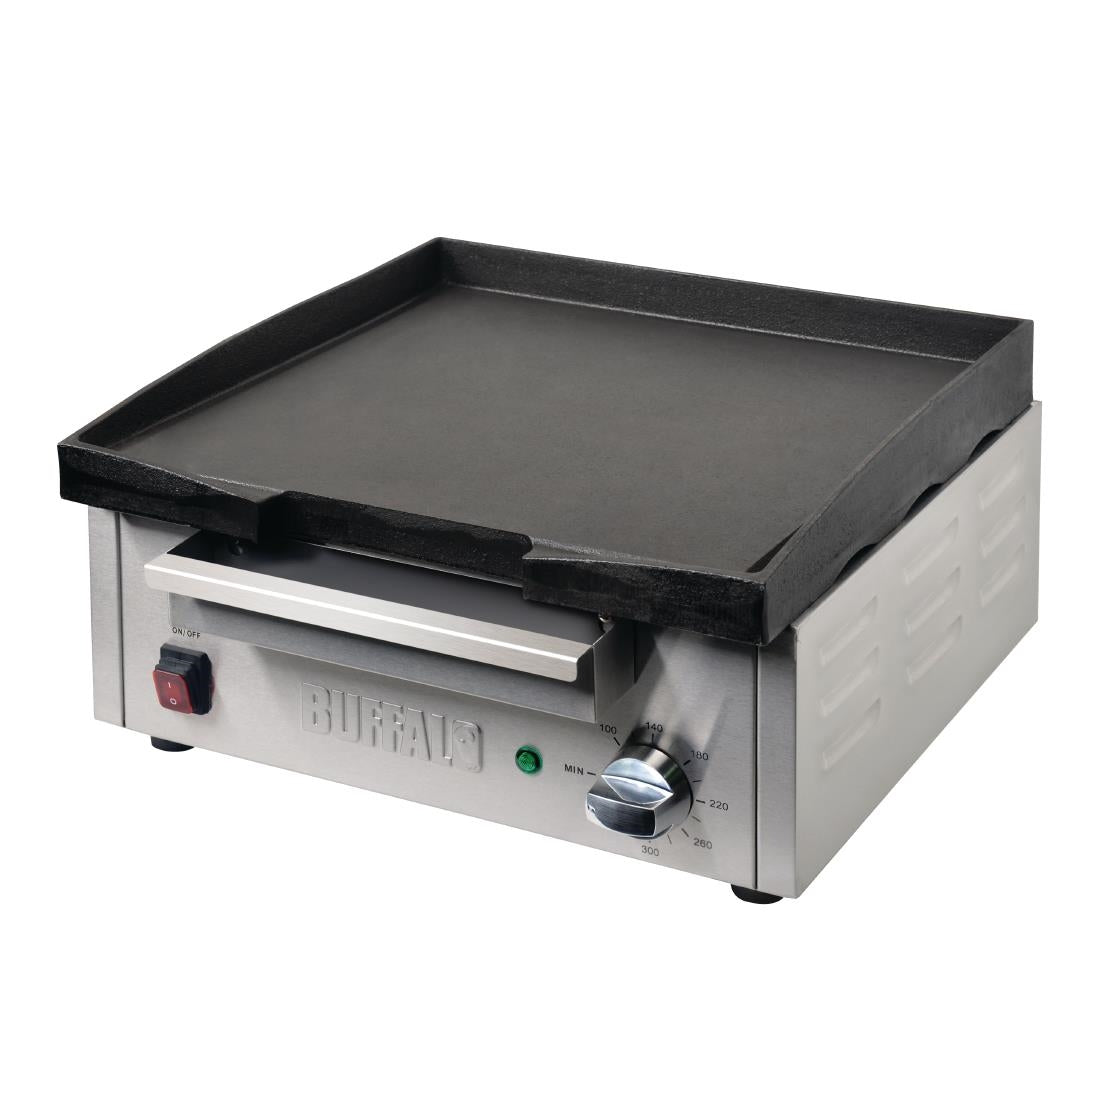 DC901 Buffalo Large Cast Iron Countertop Electric Griddle